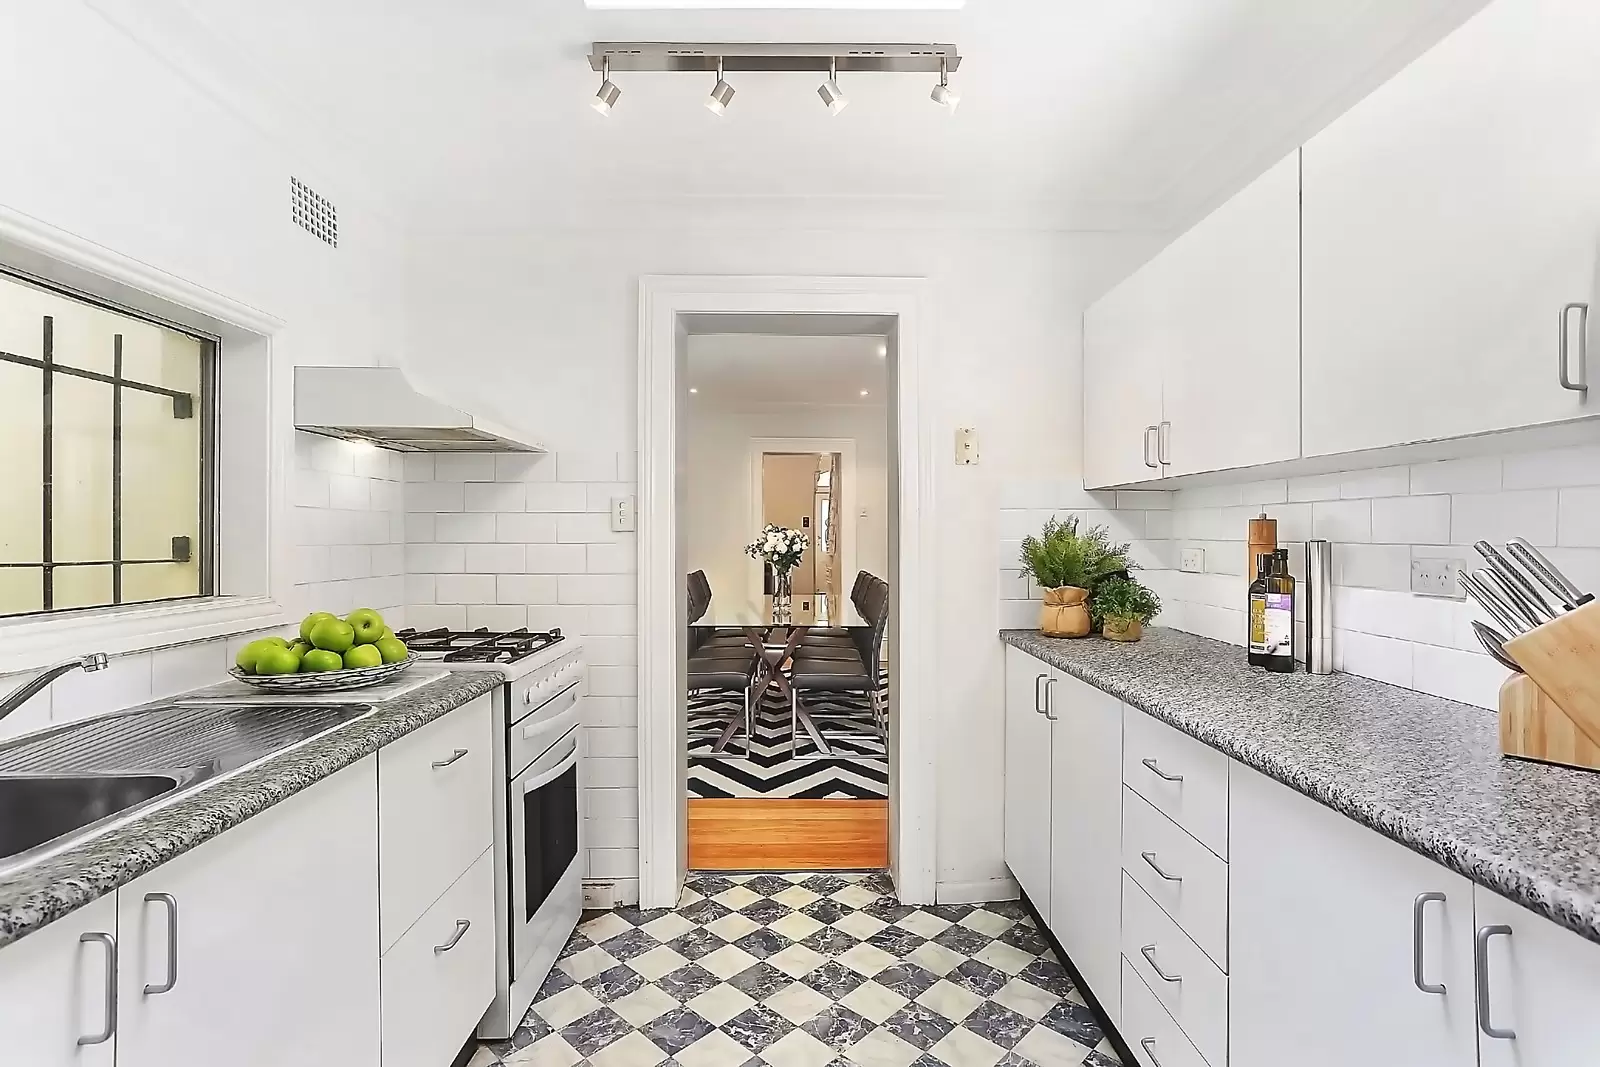 Photo #4: 31 Nobbs Street, Surry Hills - Sold by Sydney Sotheby's International Realty